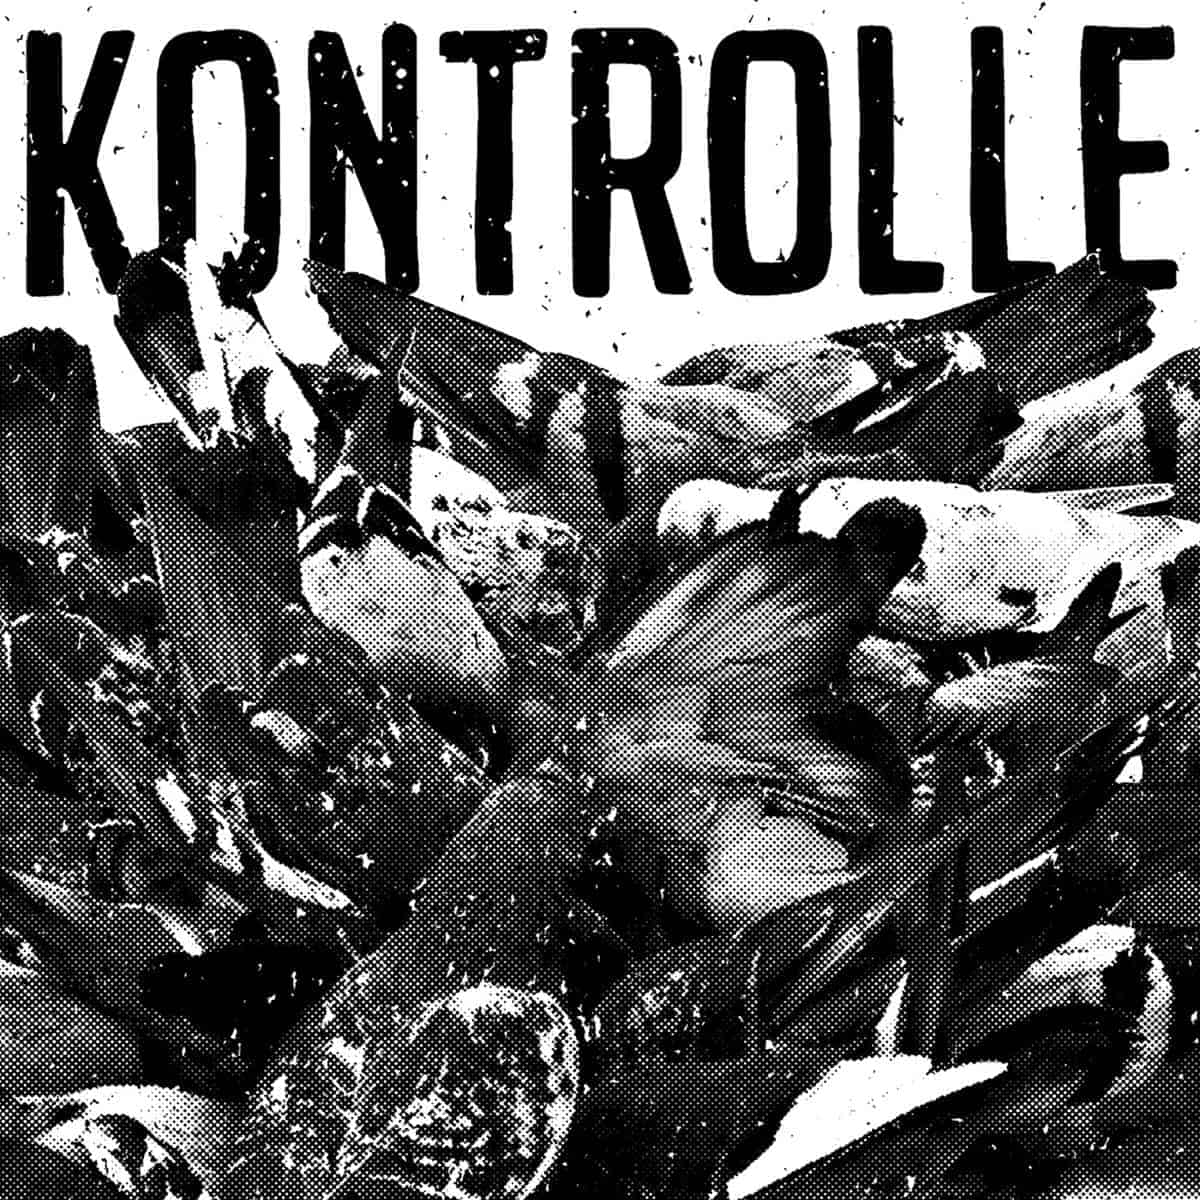 Kontrolle - s/t LP (Holy Goat) this is the KONTROLLE debut - now out on Vinyl! the songs from the long sold out demo tape newly recorded and mixed plus two outstanding remixes.